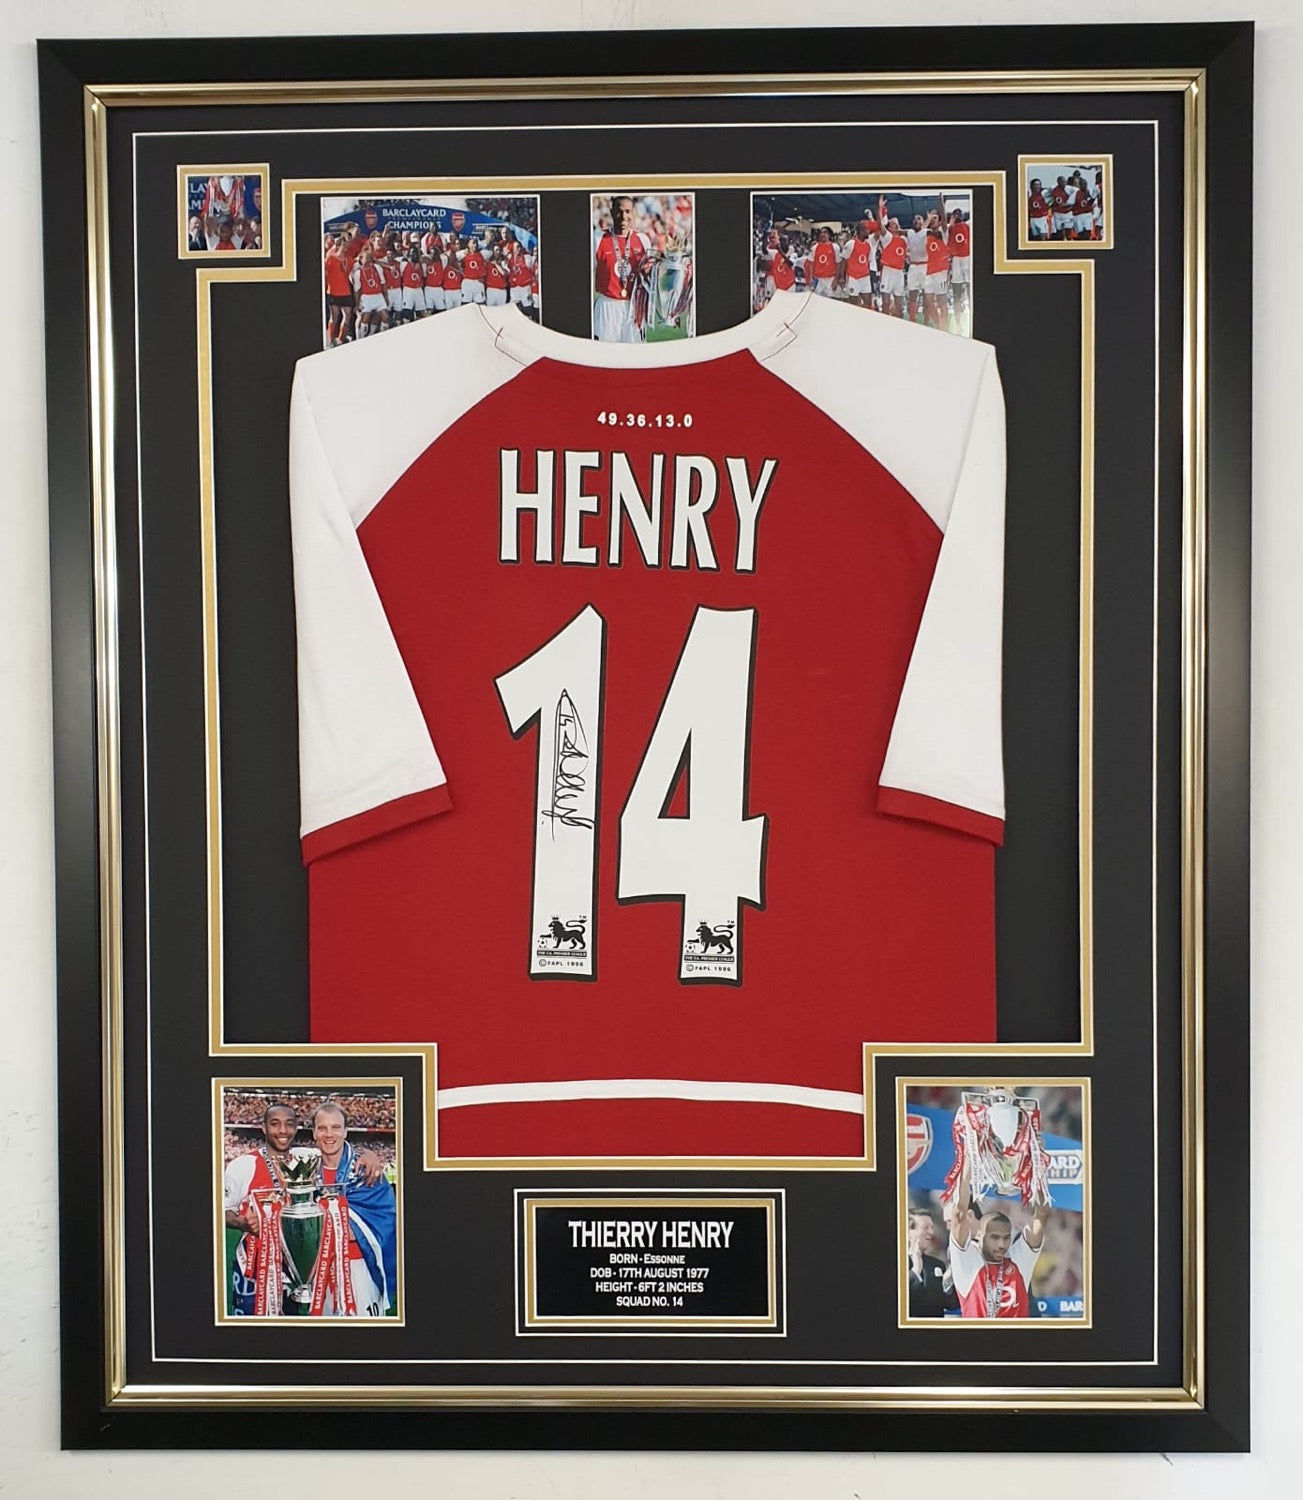 Henry Signed invincible shirt